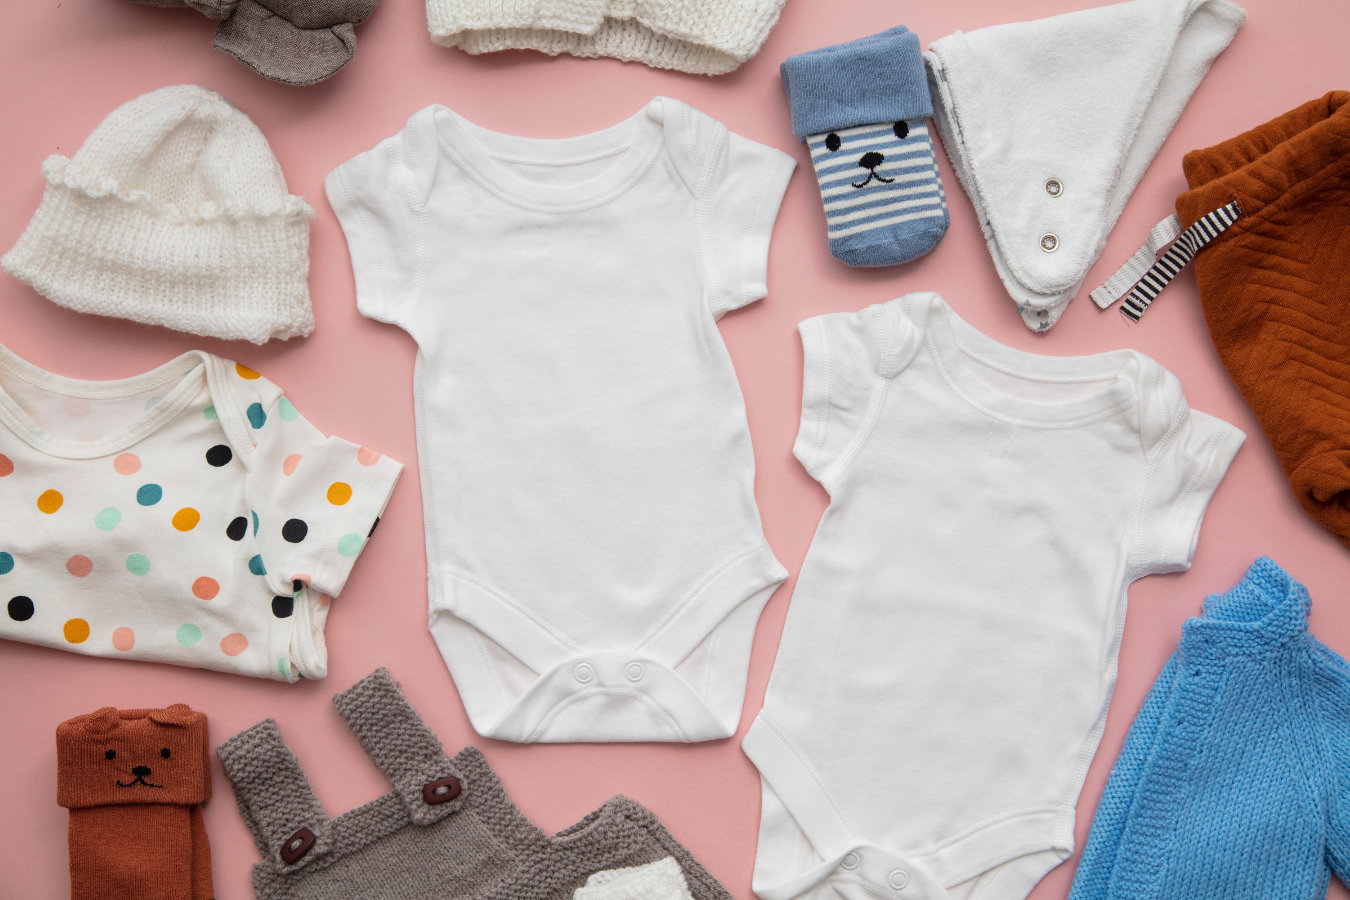 Choosing the Perfect Baby Clothing Brand